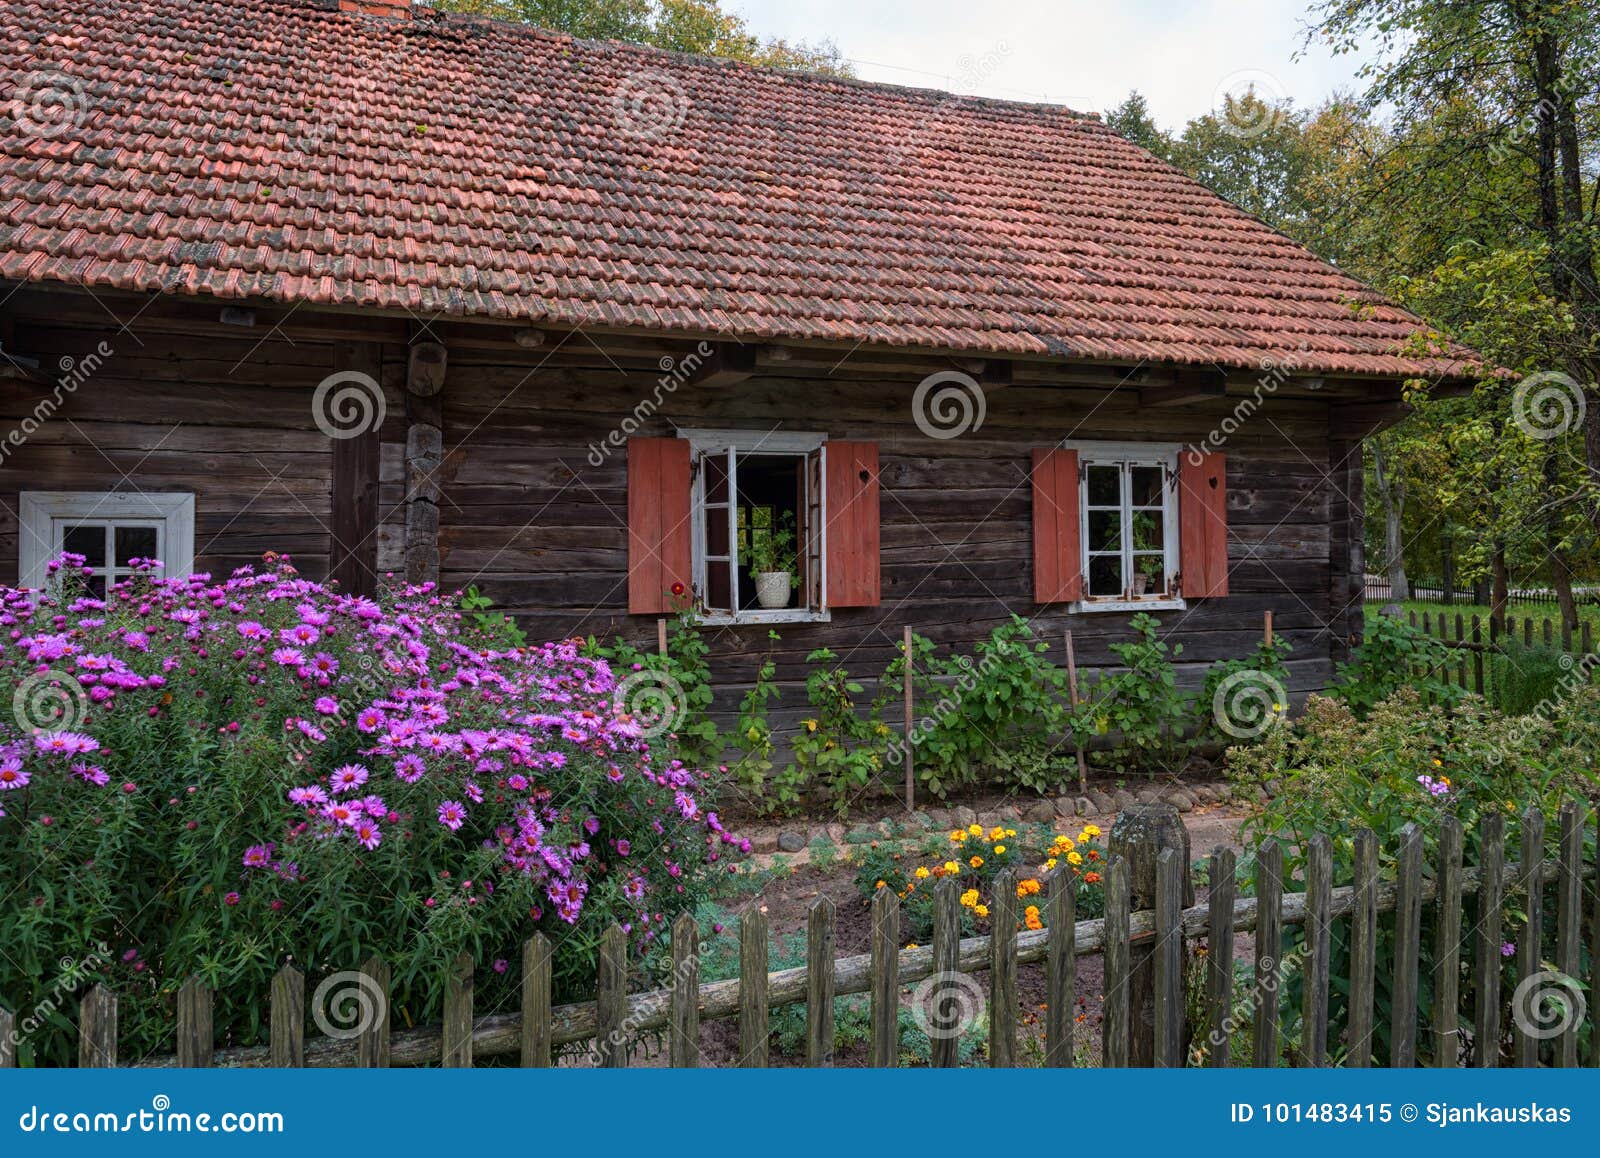 traditional country house and garden rumsiskes lithuania